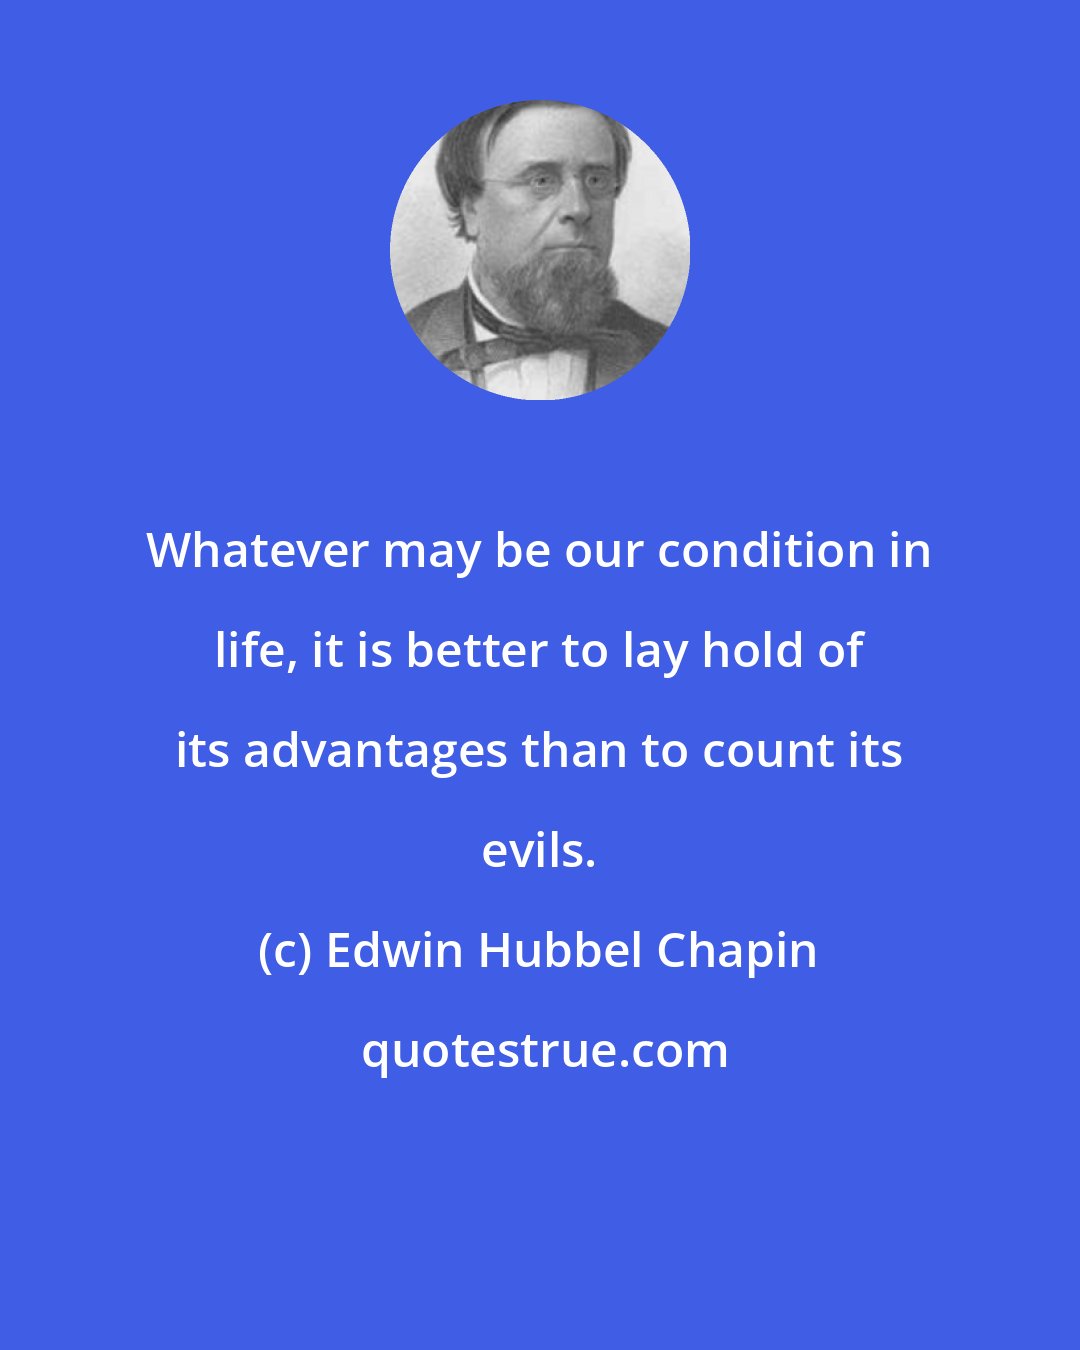 Edwin Hubbel Chapin: Whatever may be our condition in life, it is better to lay hold of its advantages than to count its evils.